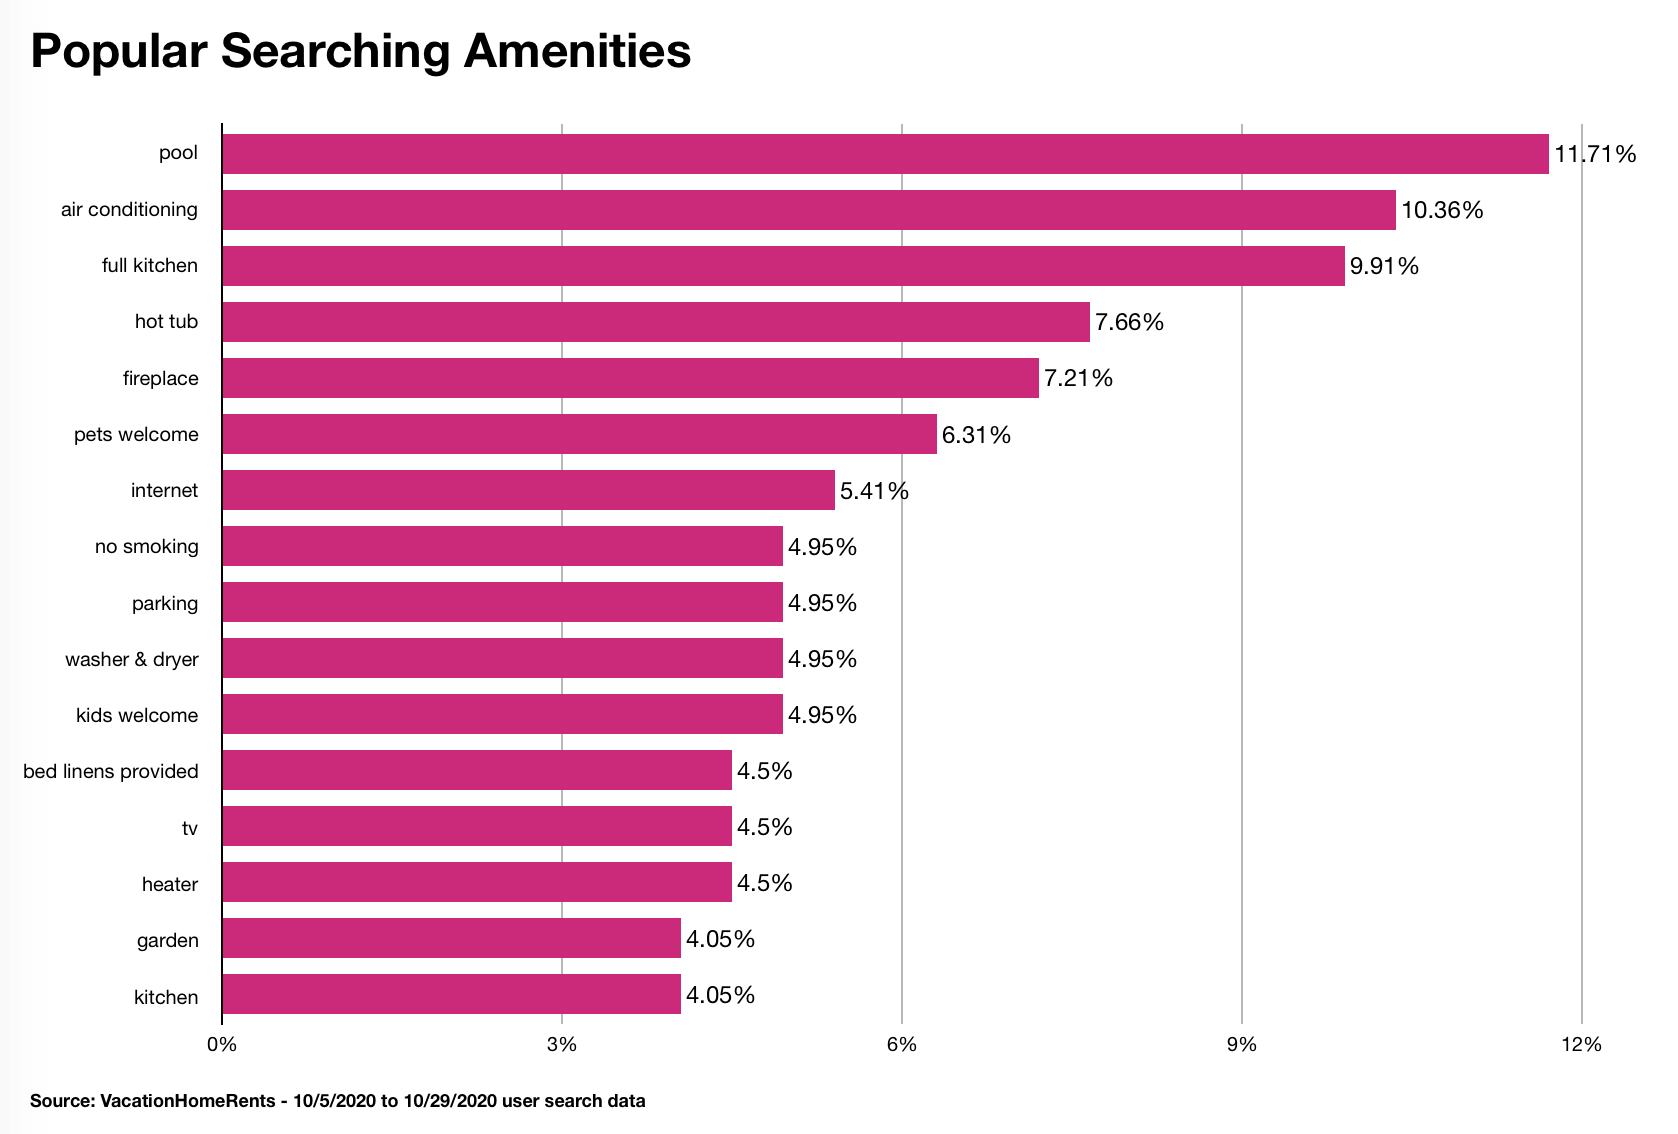 2020 Travel Trends Popular Amenities Search Distribution by VacationHomeRents.com